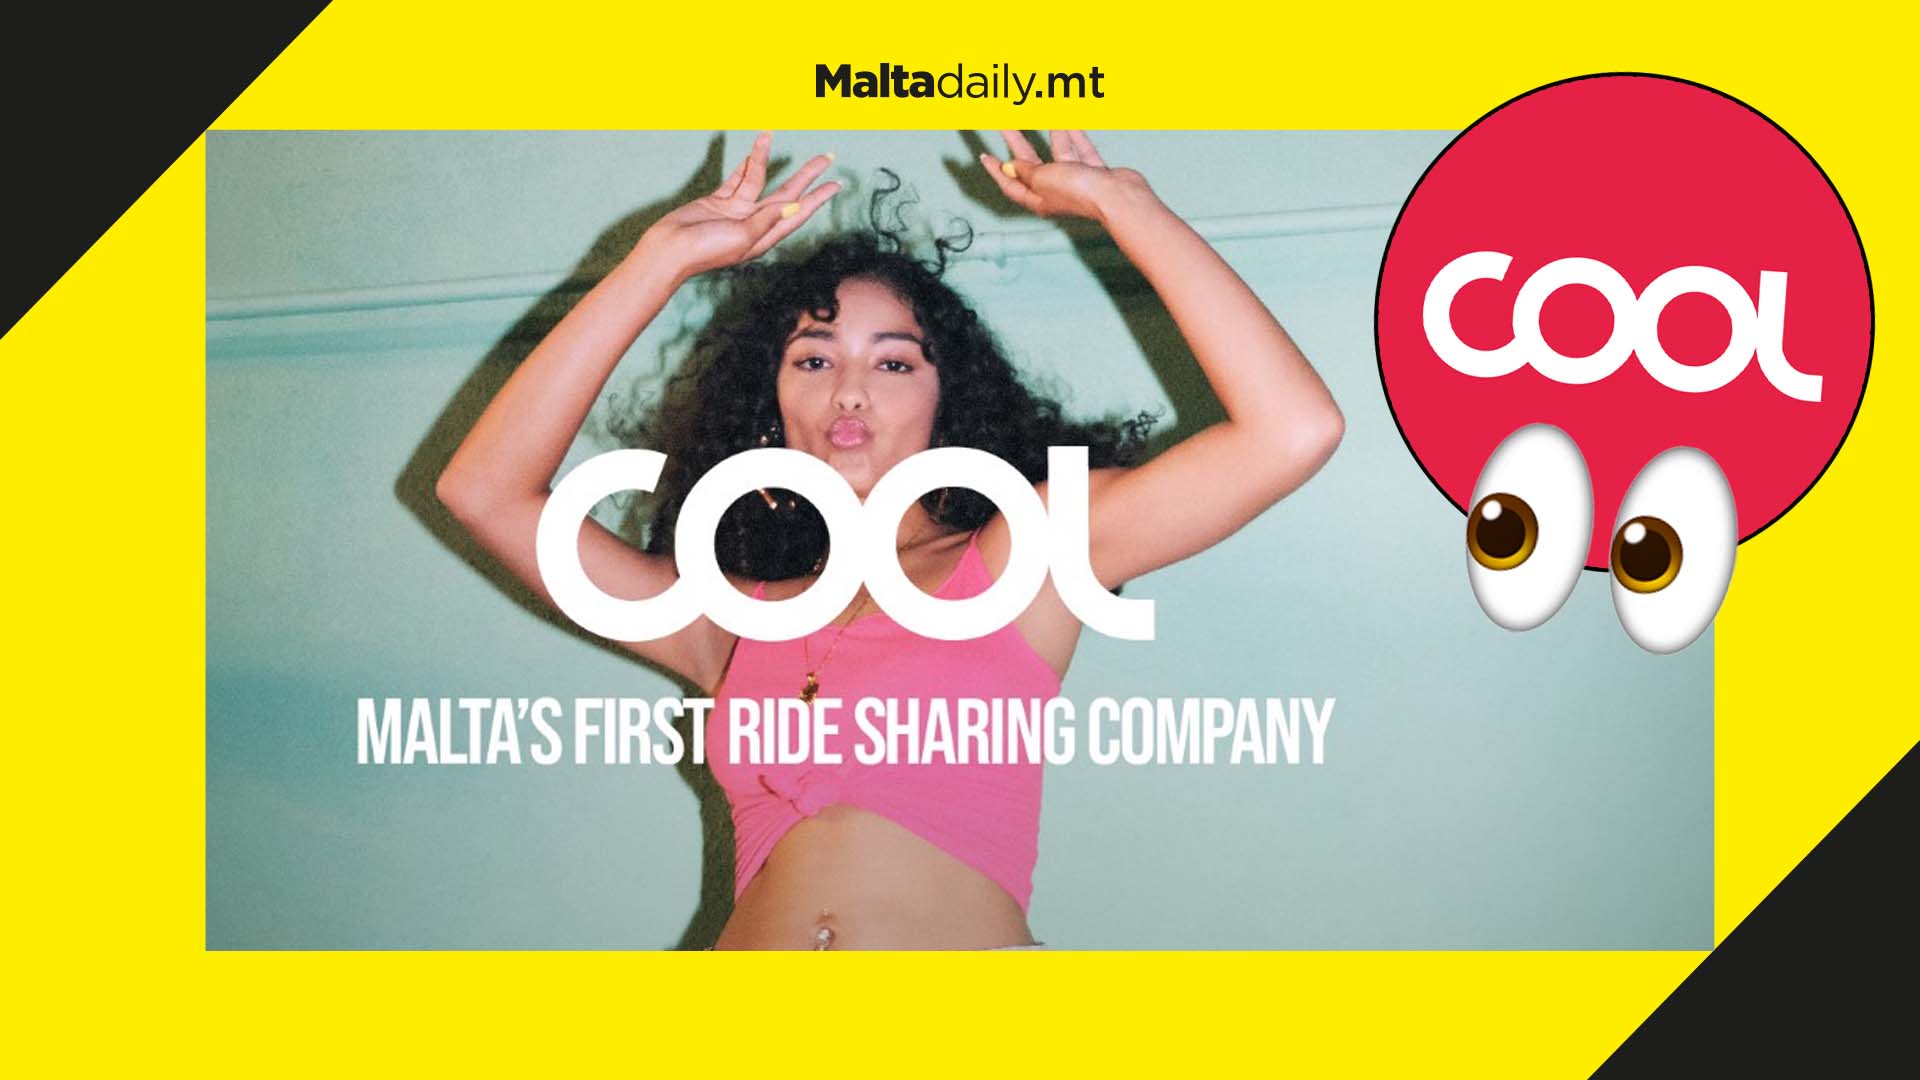 Cool Ride Pooling rebrands as Cool with a mission to reduce single occupancy rides on Malta’s roads